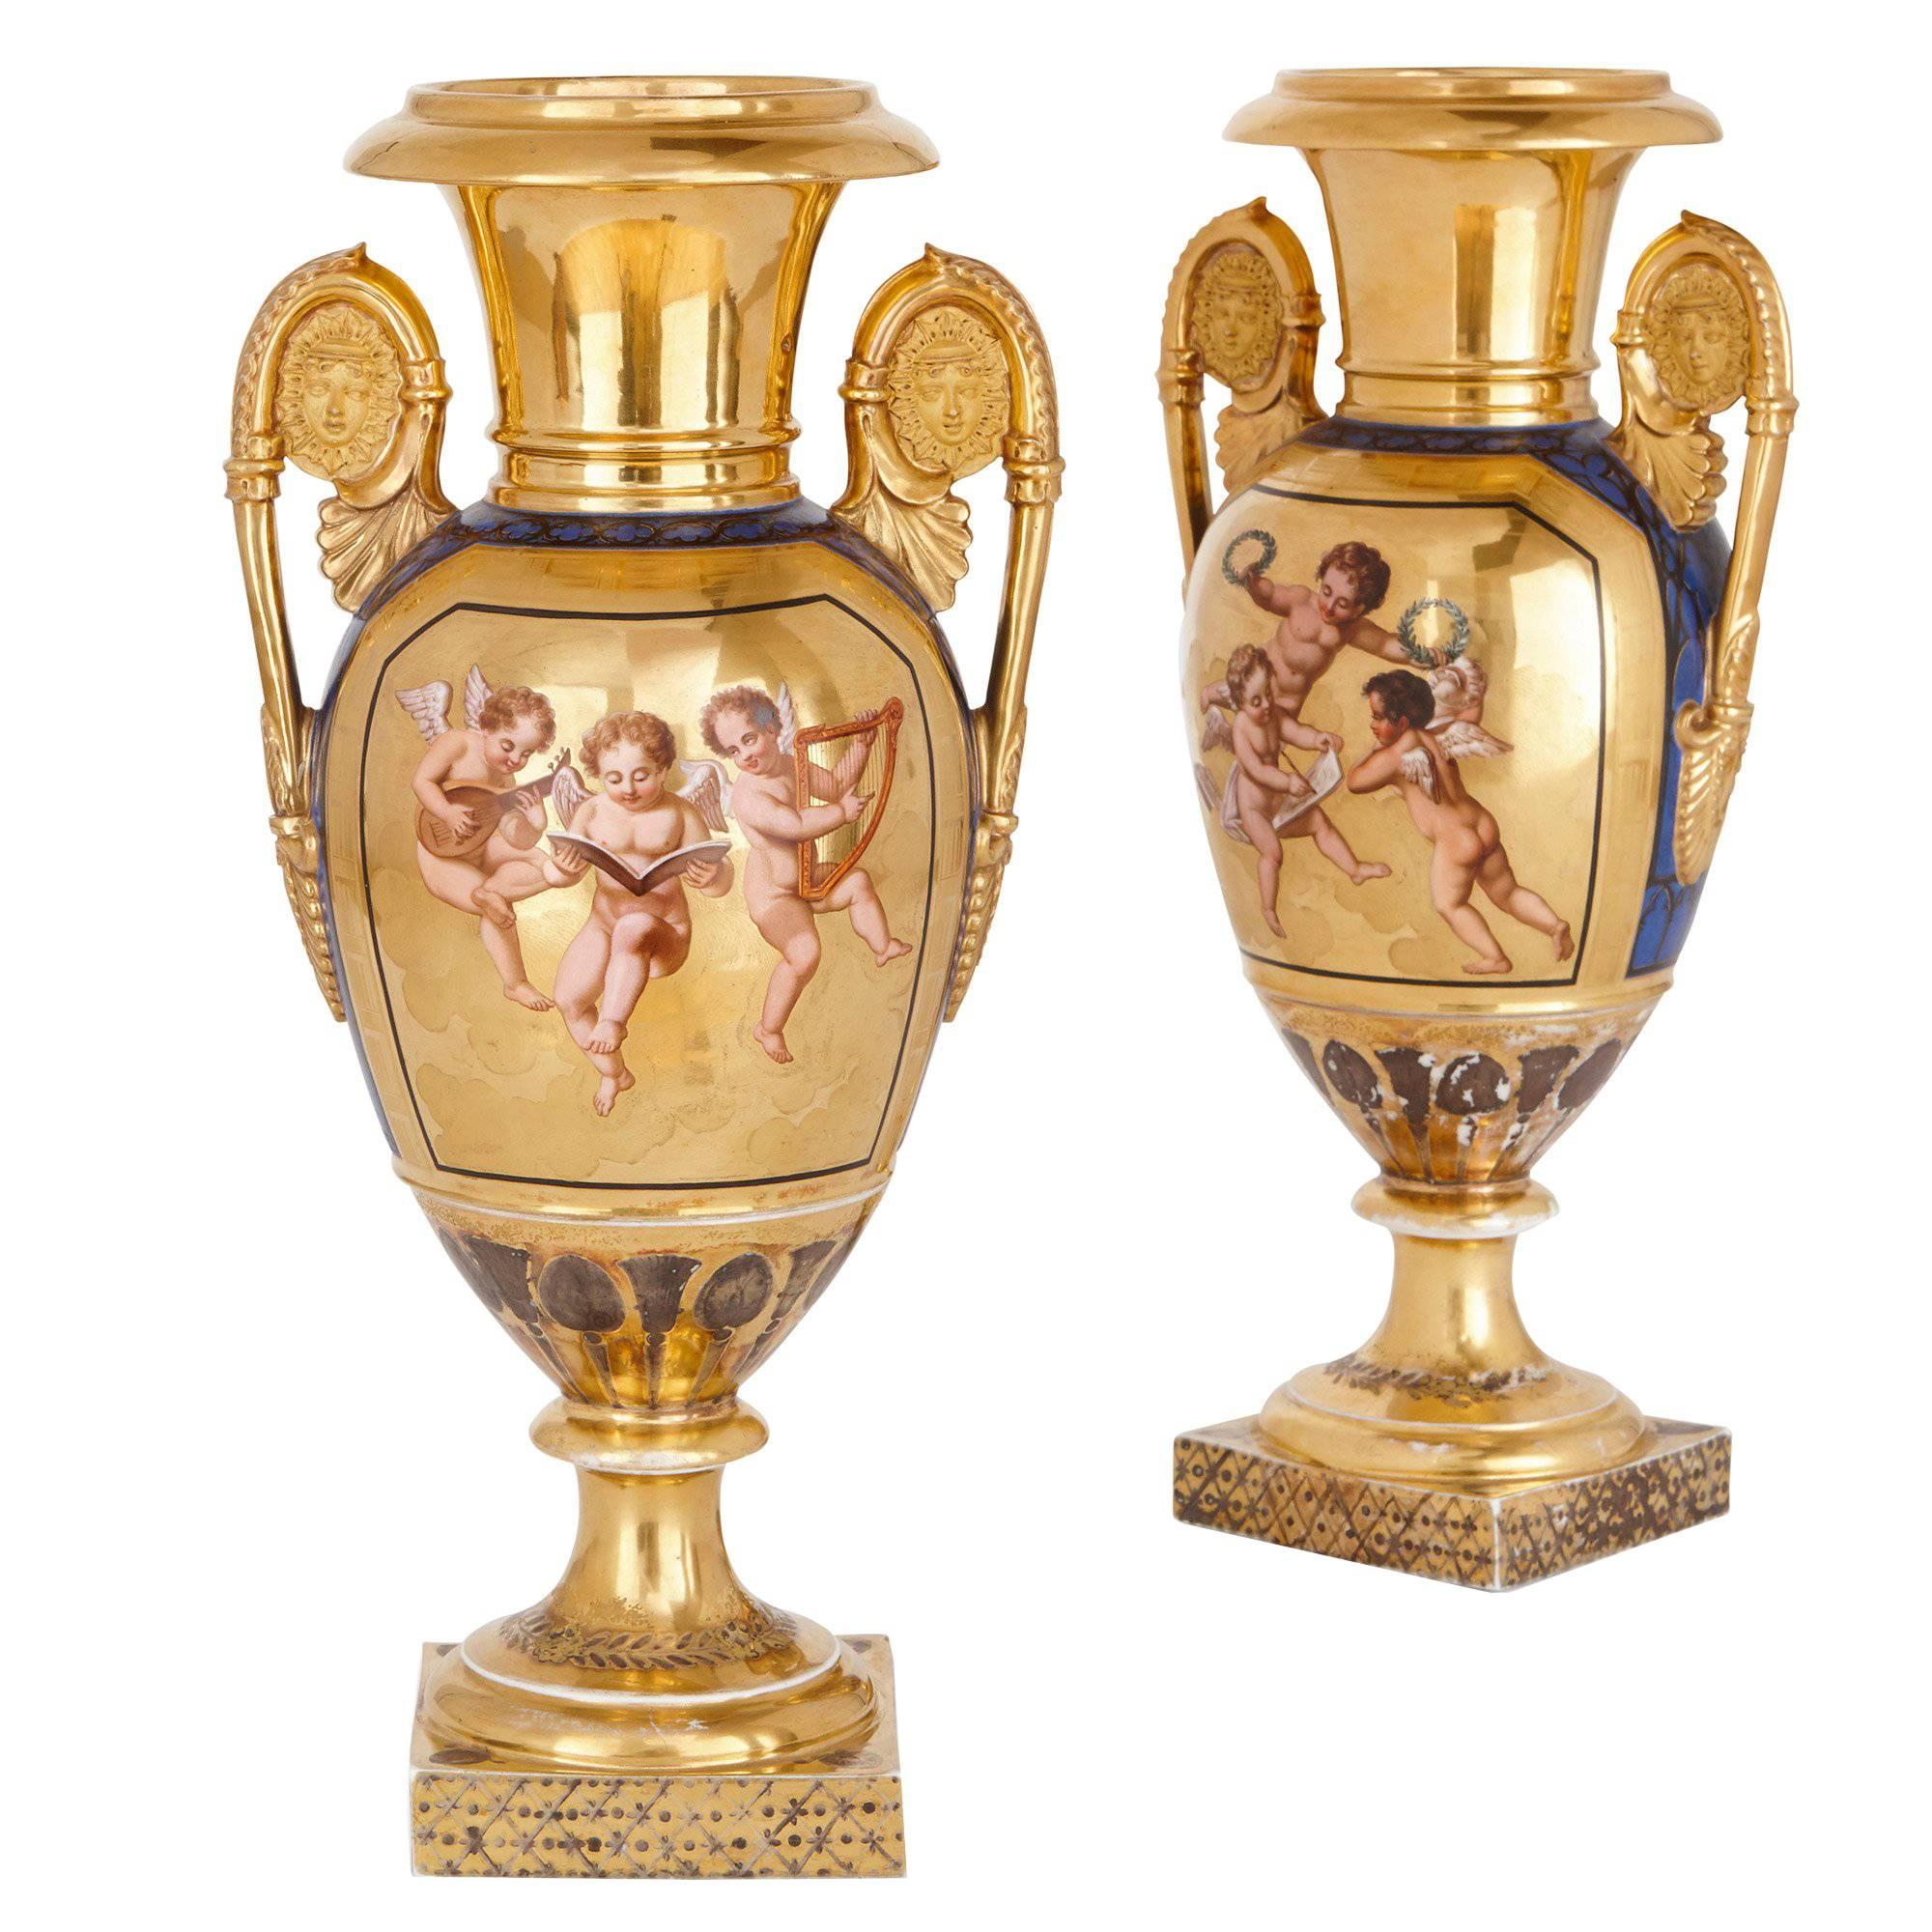 Pair of French Empire Period Gilt Ground Porcelain Vases